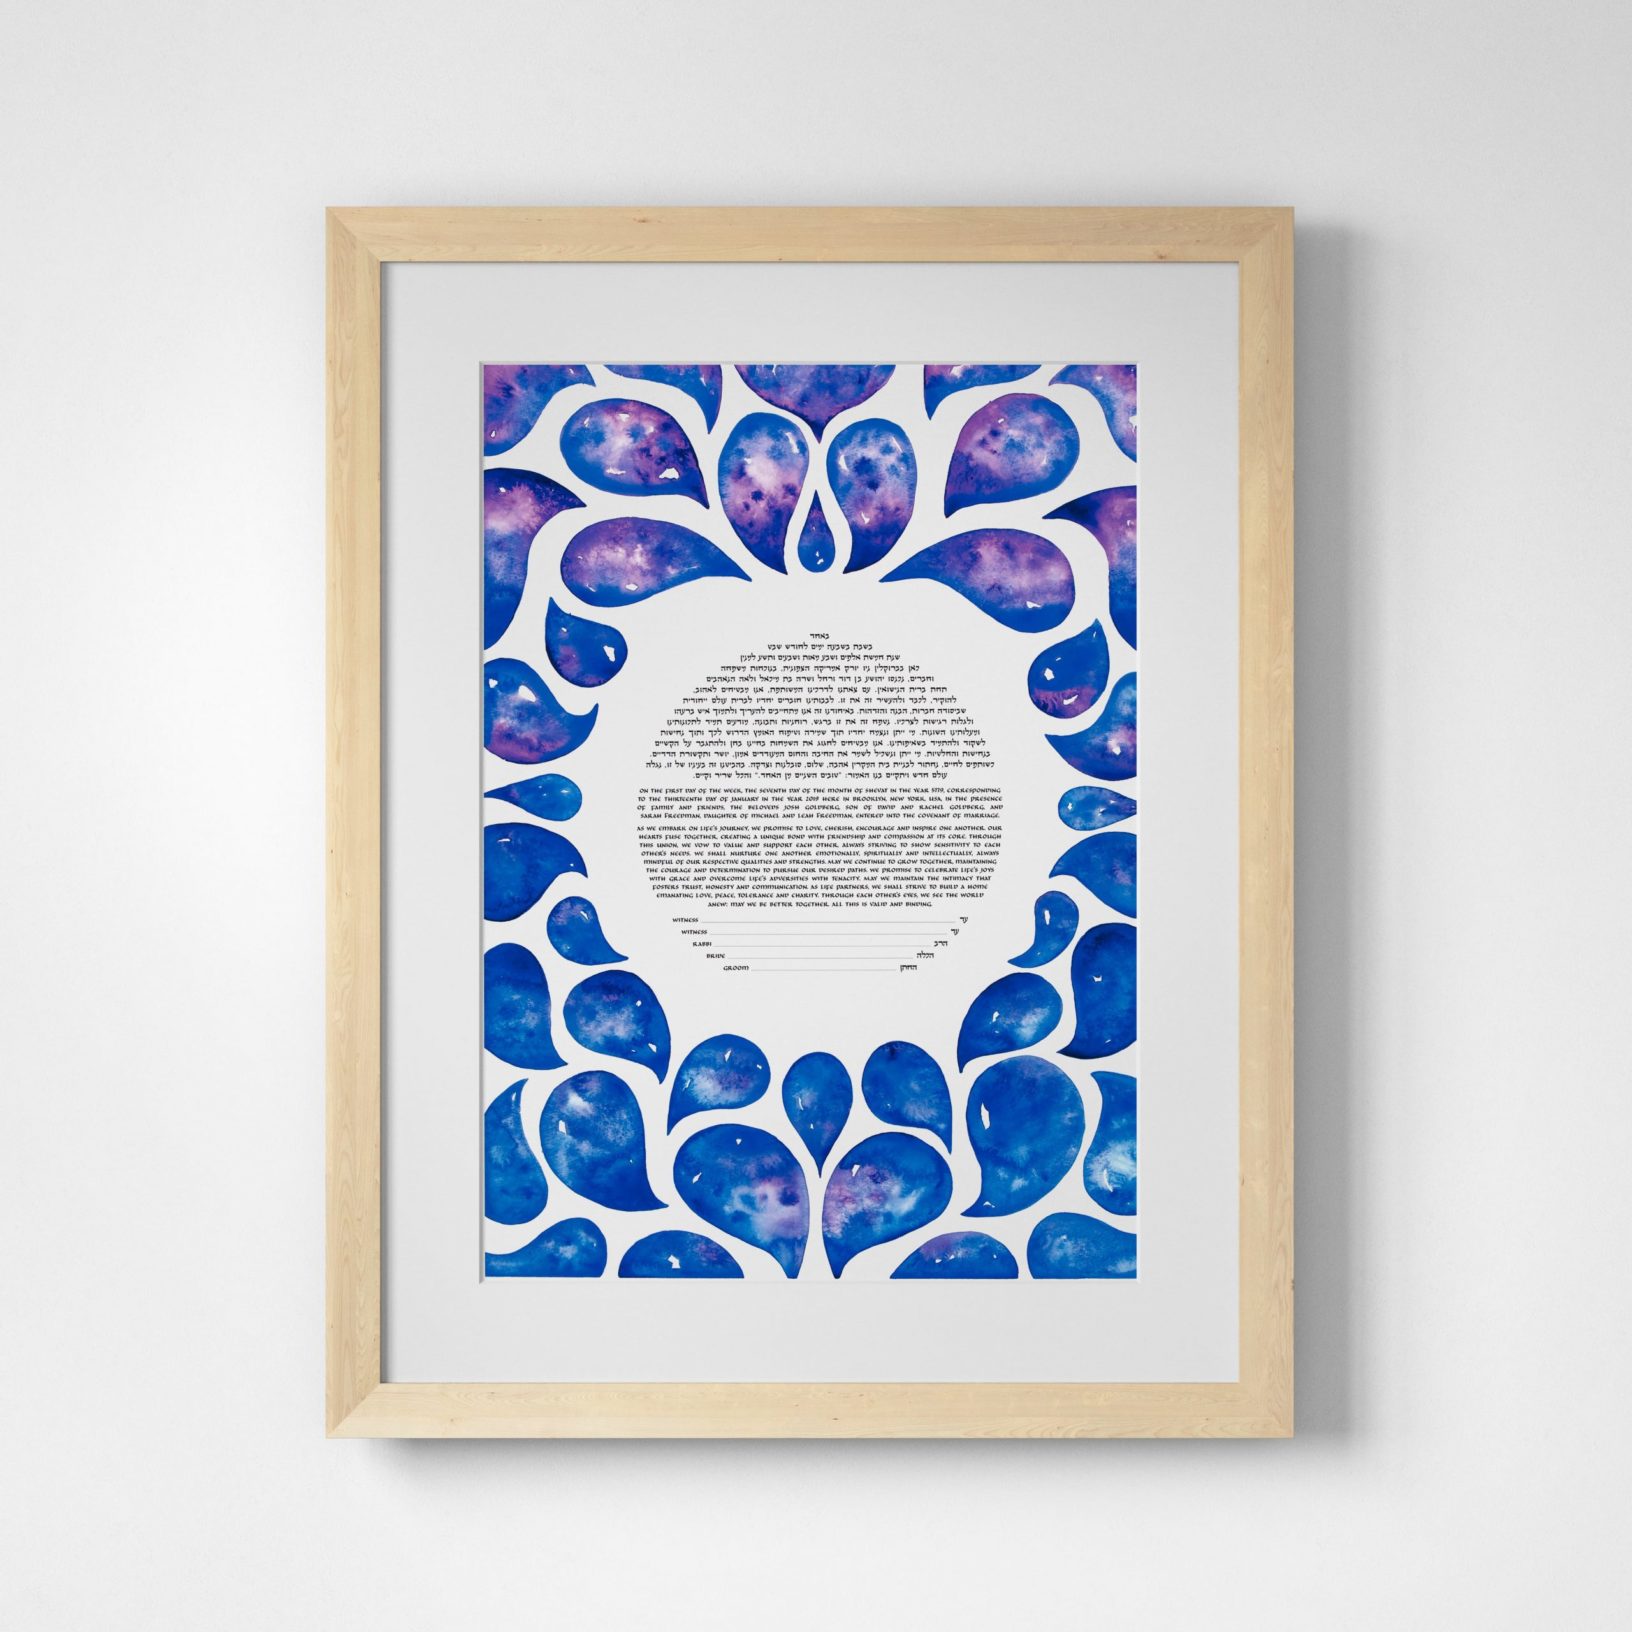 Mirrored Drops - Blues & Purples Ketubah Marriage Contracts by Britt Yudell